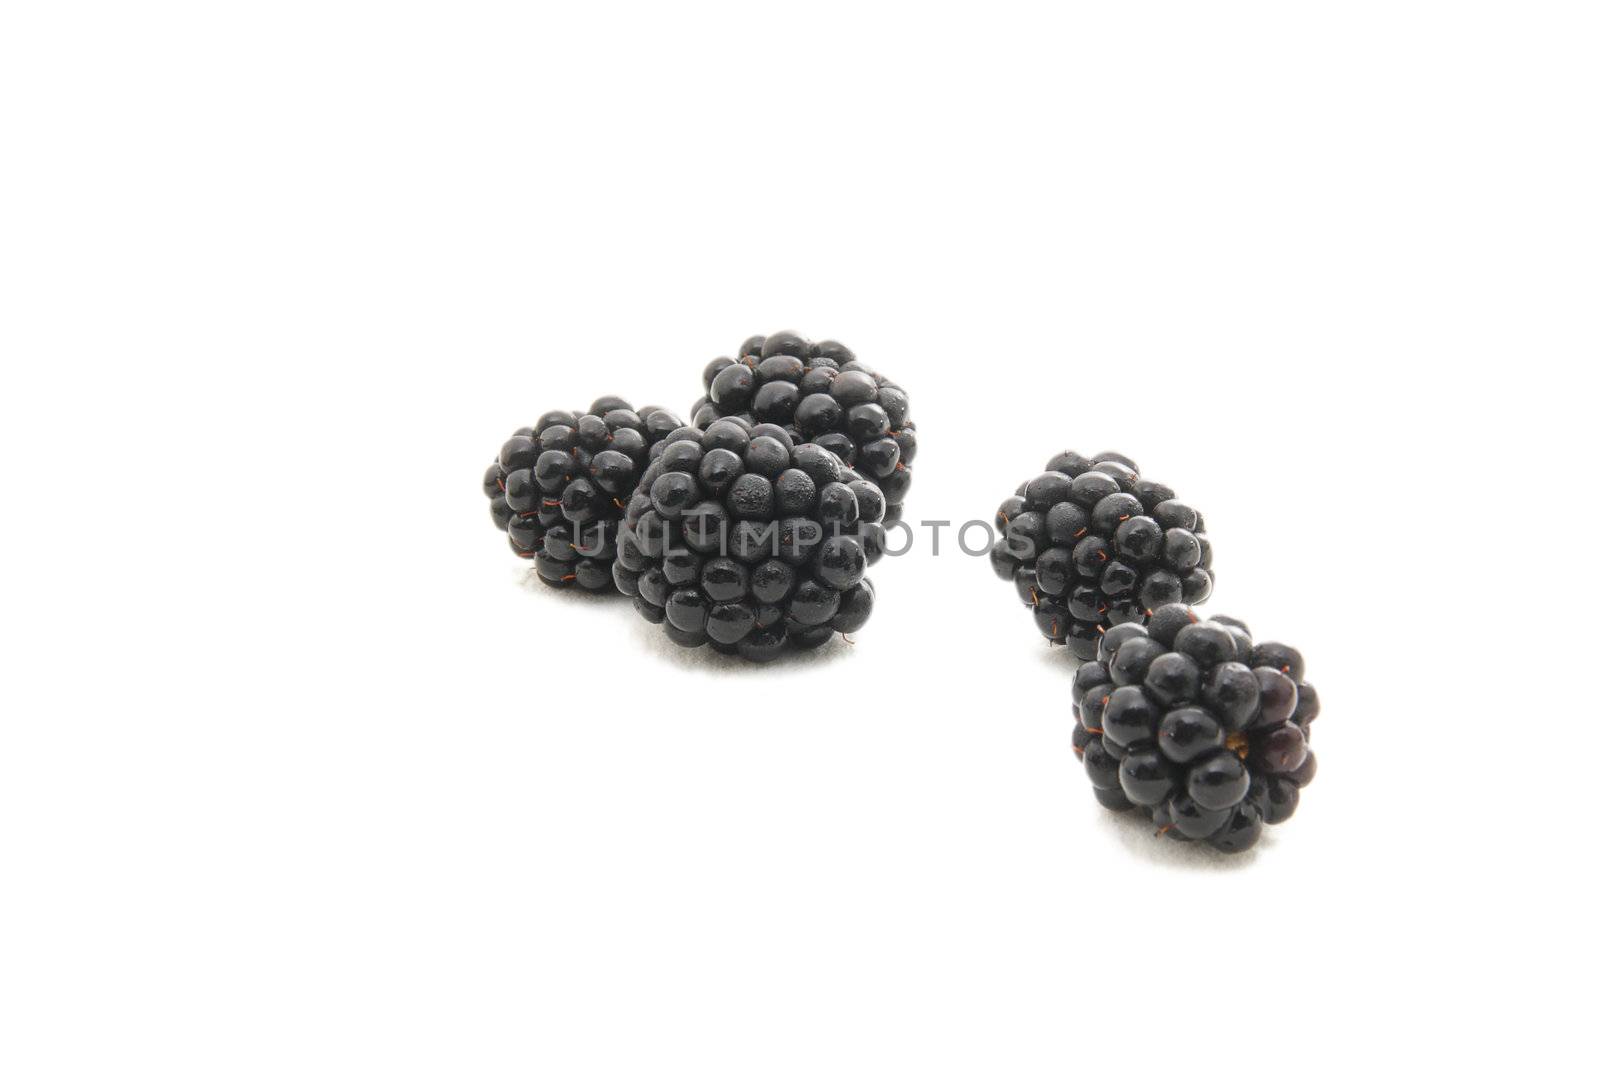 Group of plump, juicy blackberries ready to eat, isolated on white